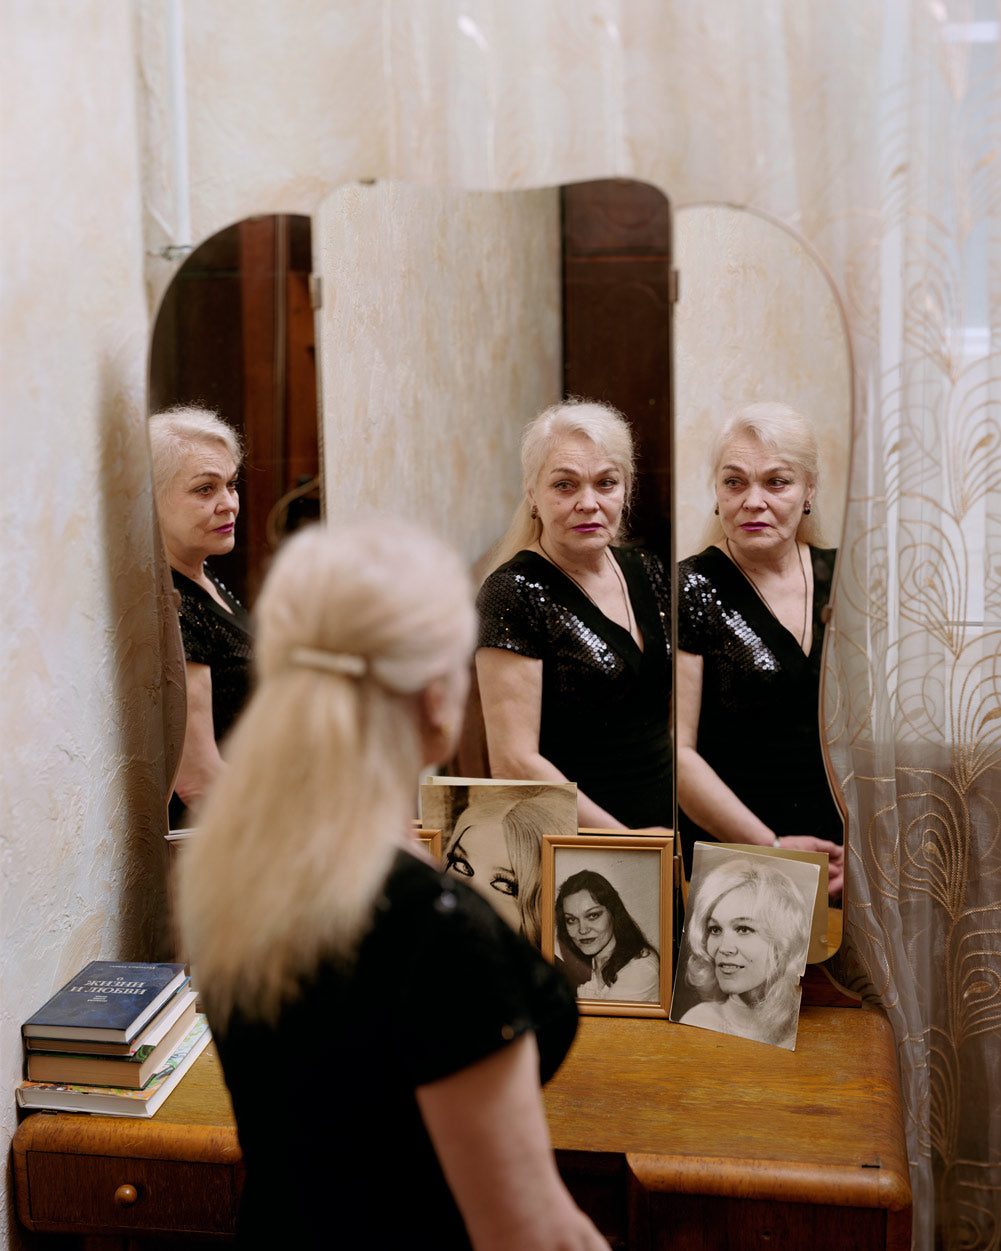 Alec Soth — I Know How Furiously Your Heart Is Beating